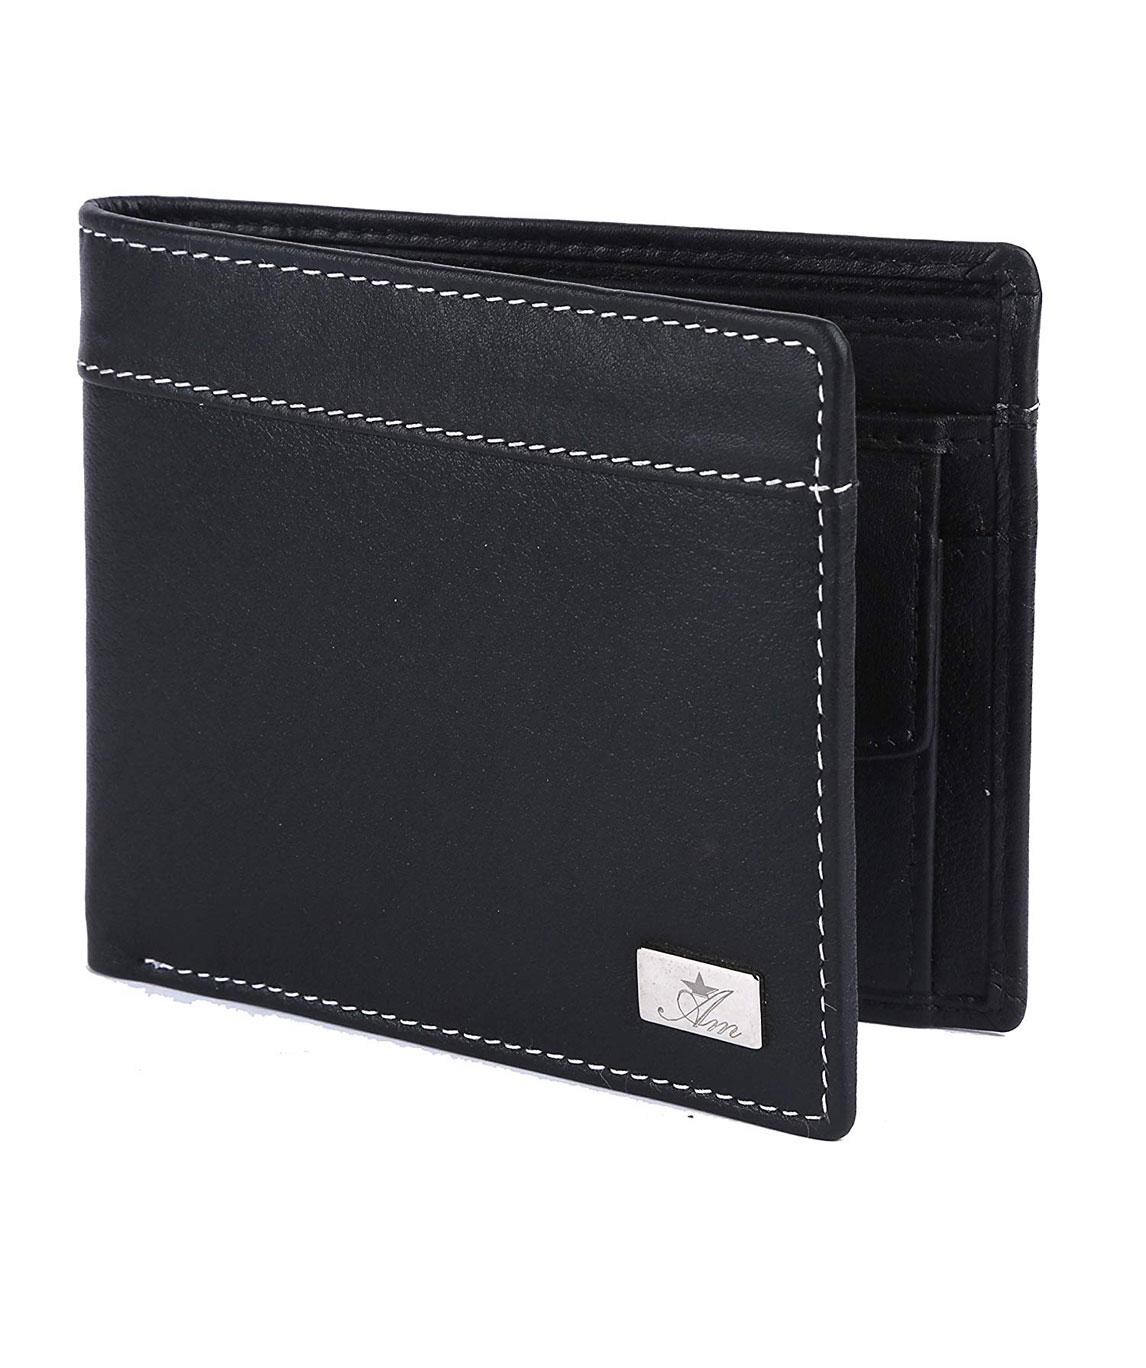 Am Leather Bi Fold Genuine Leather Wallet Black Good Premium Quality Hand Crafted Purse Wallet for Men and Boys